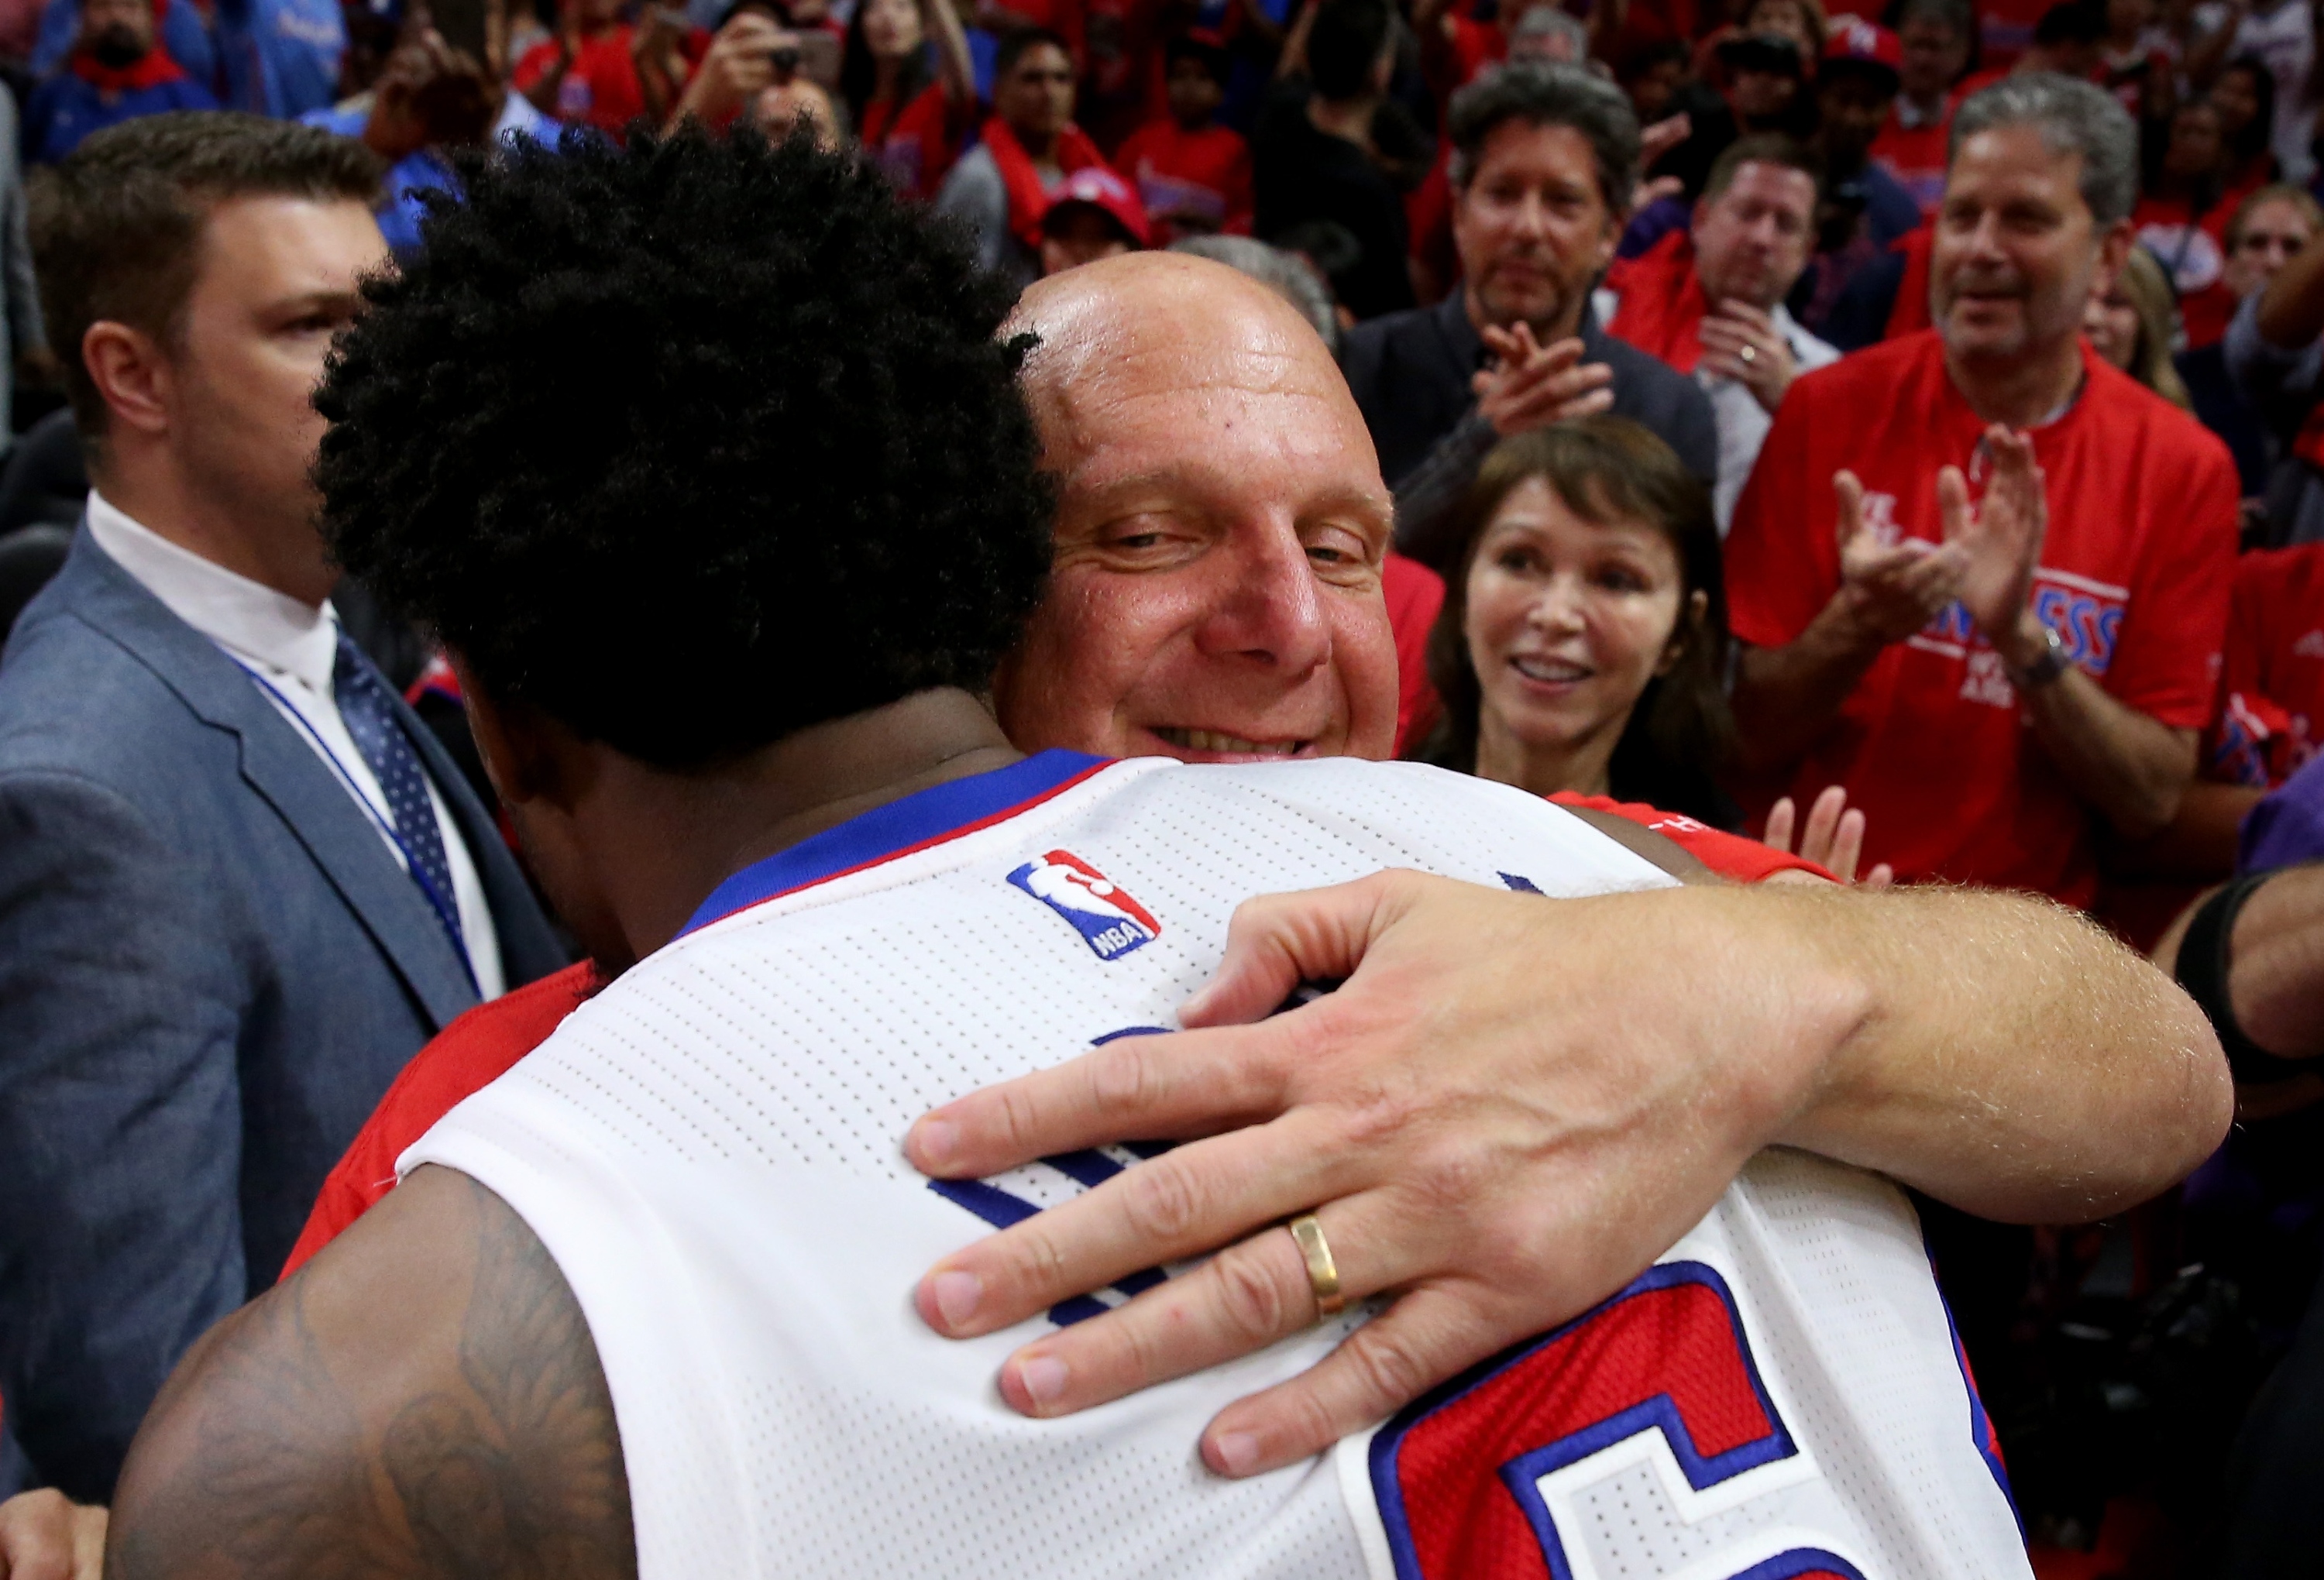 Steve Ballmer and the Clippers got their man back. (Stephen Dunn/Getty Images)